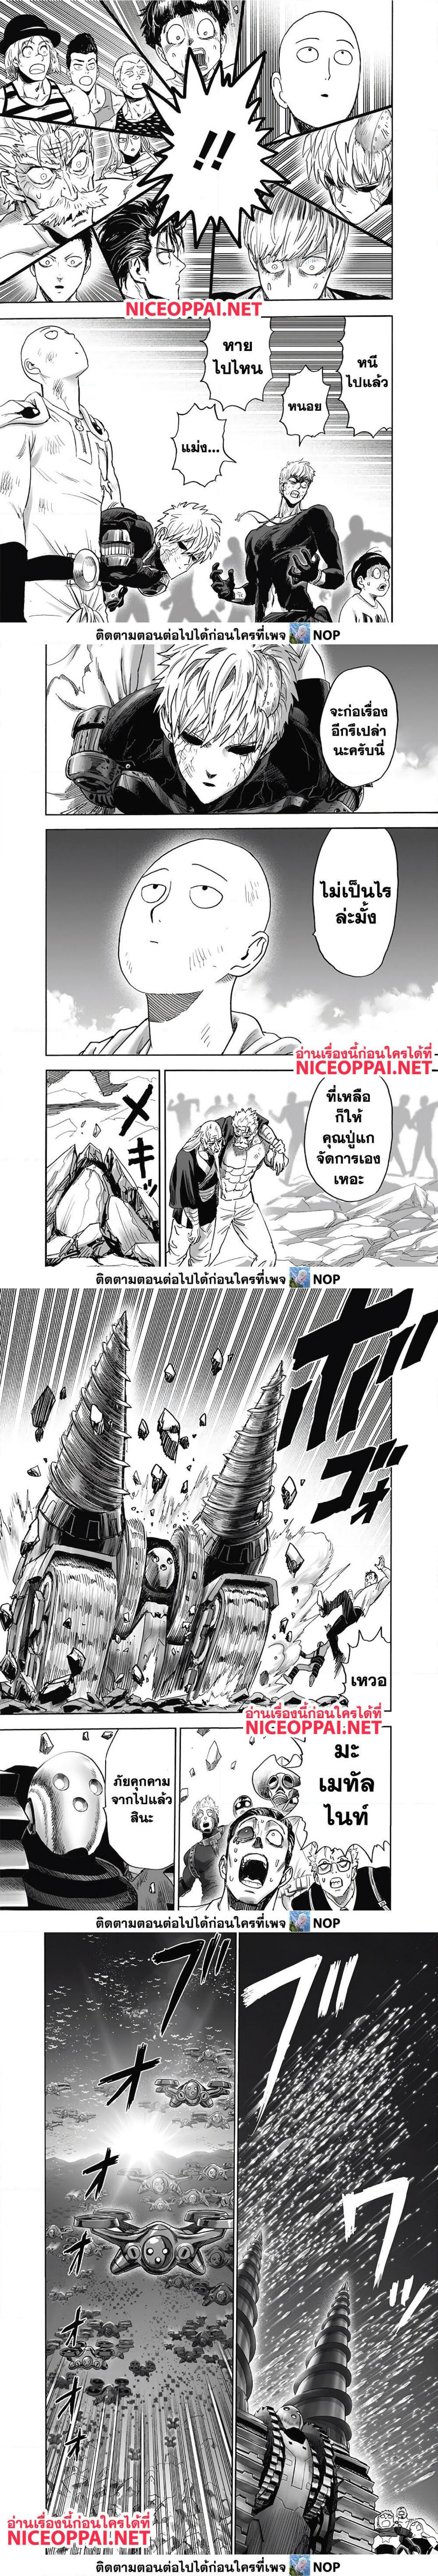 One Punch Man10